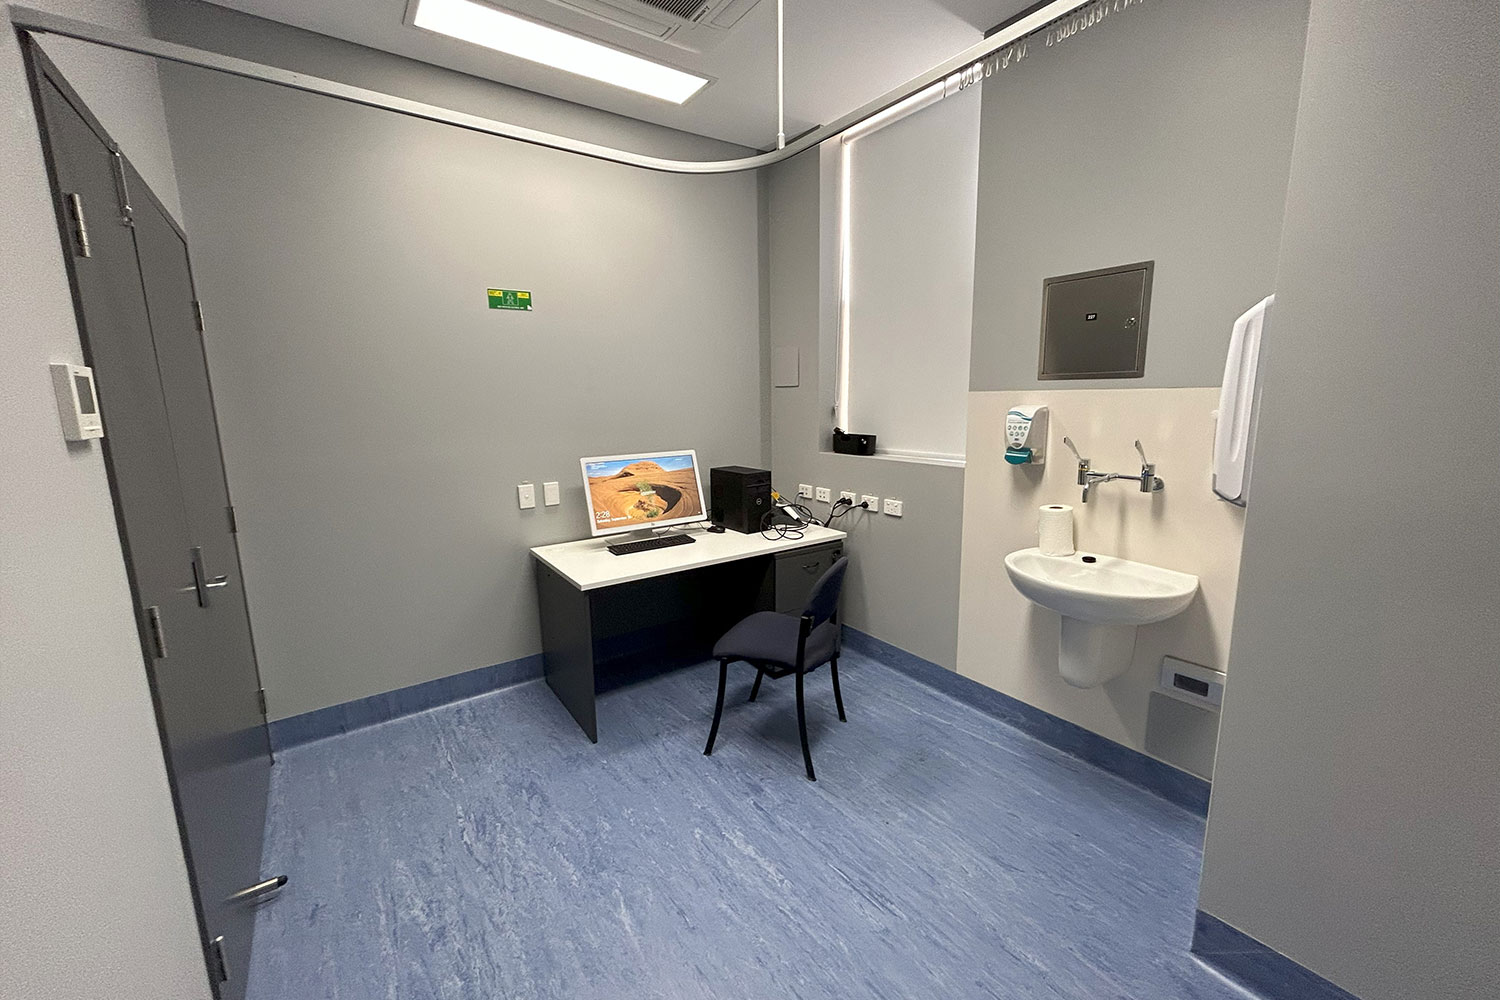 State-of-the-Art Medical Facilities by BWJ Construction